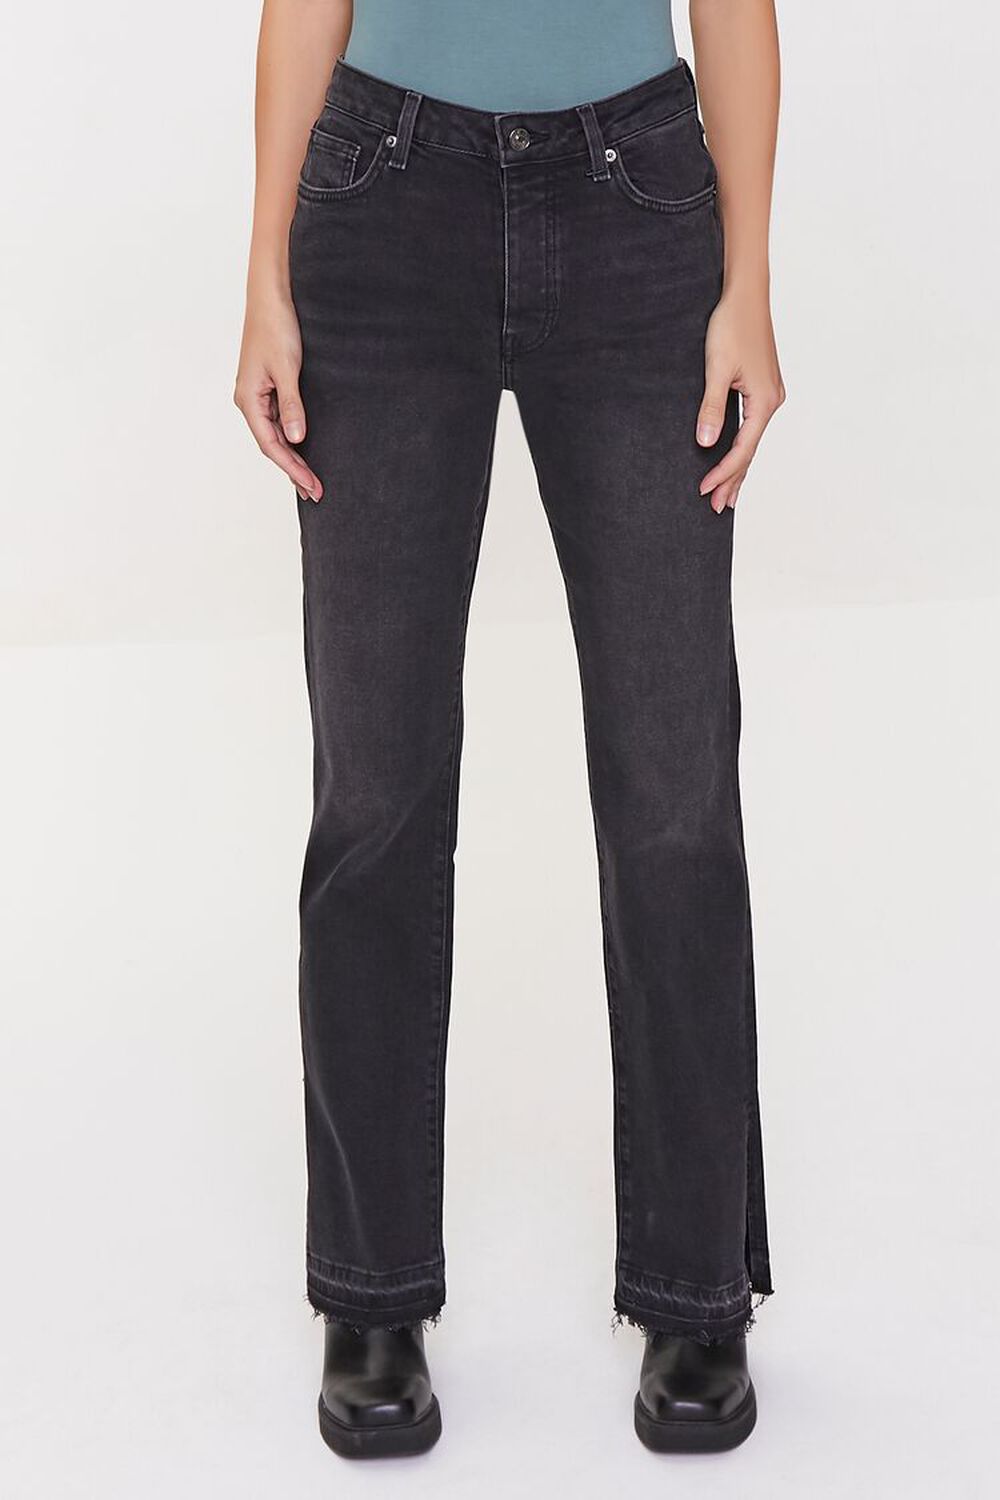 WASHED BLACK High-Rise Bootleg Jeans, image 2